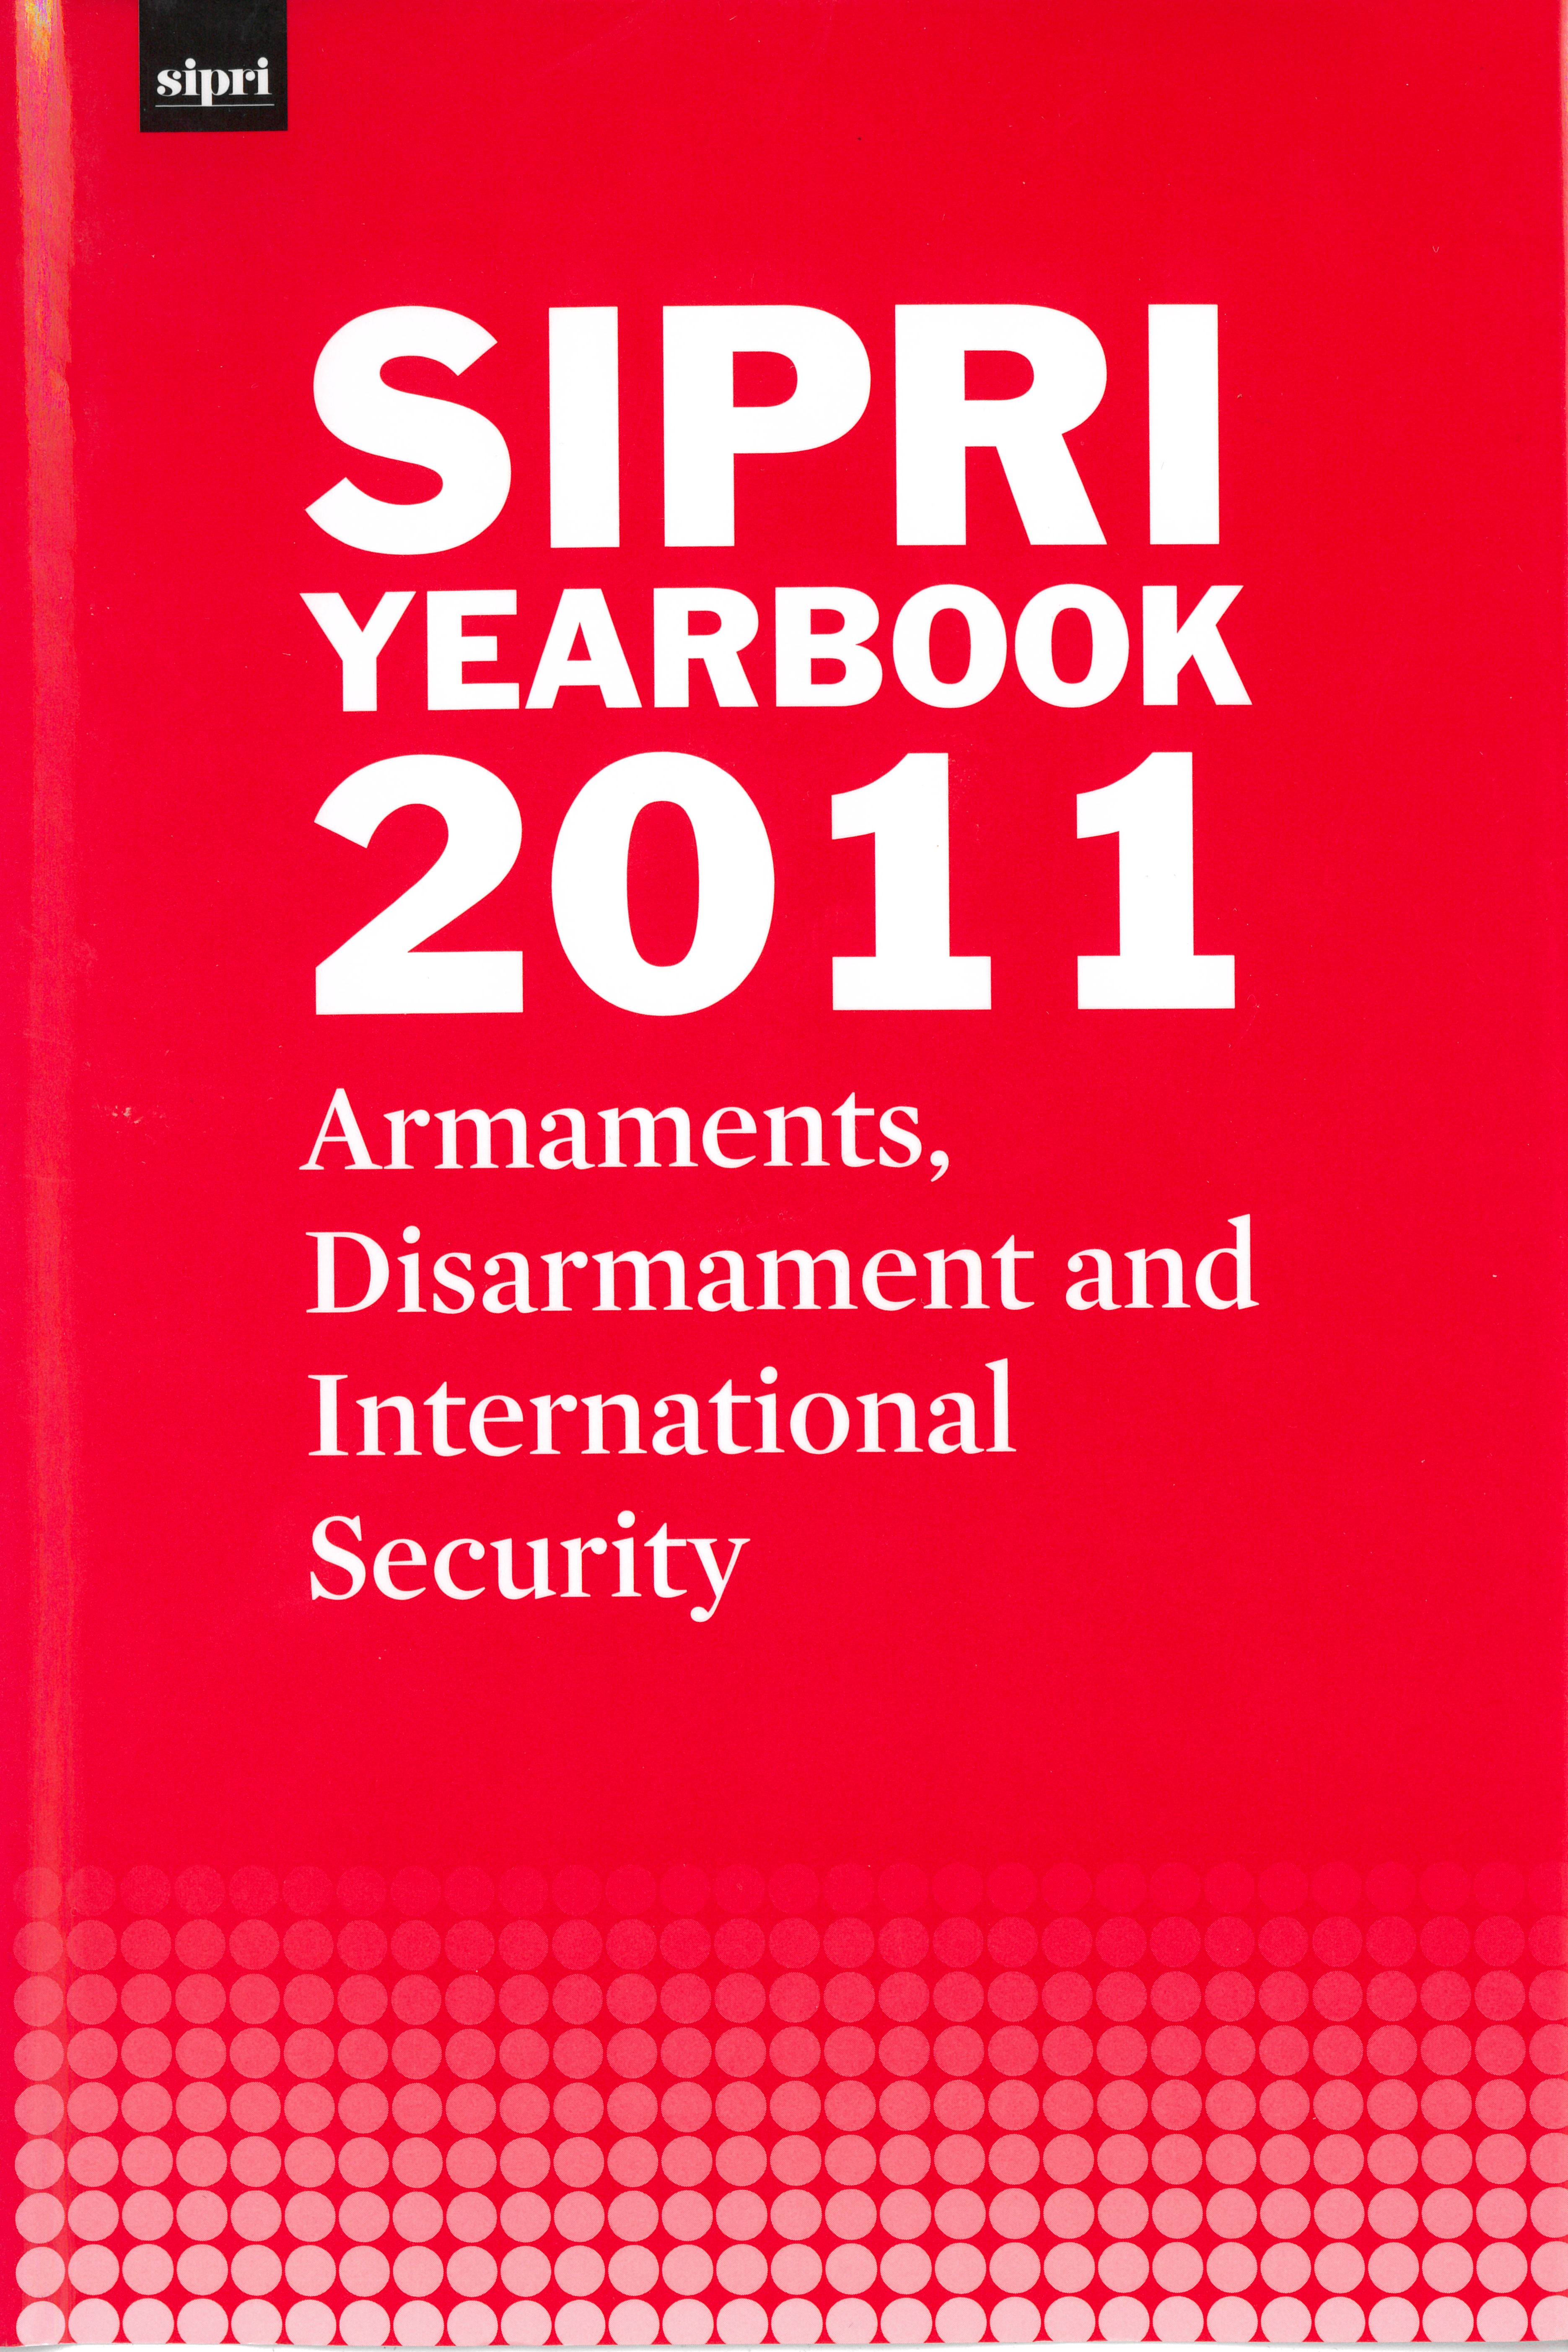 SIPRI yearbook 2011 cover